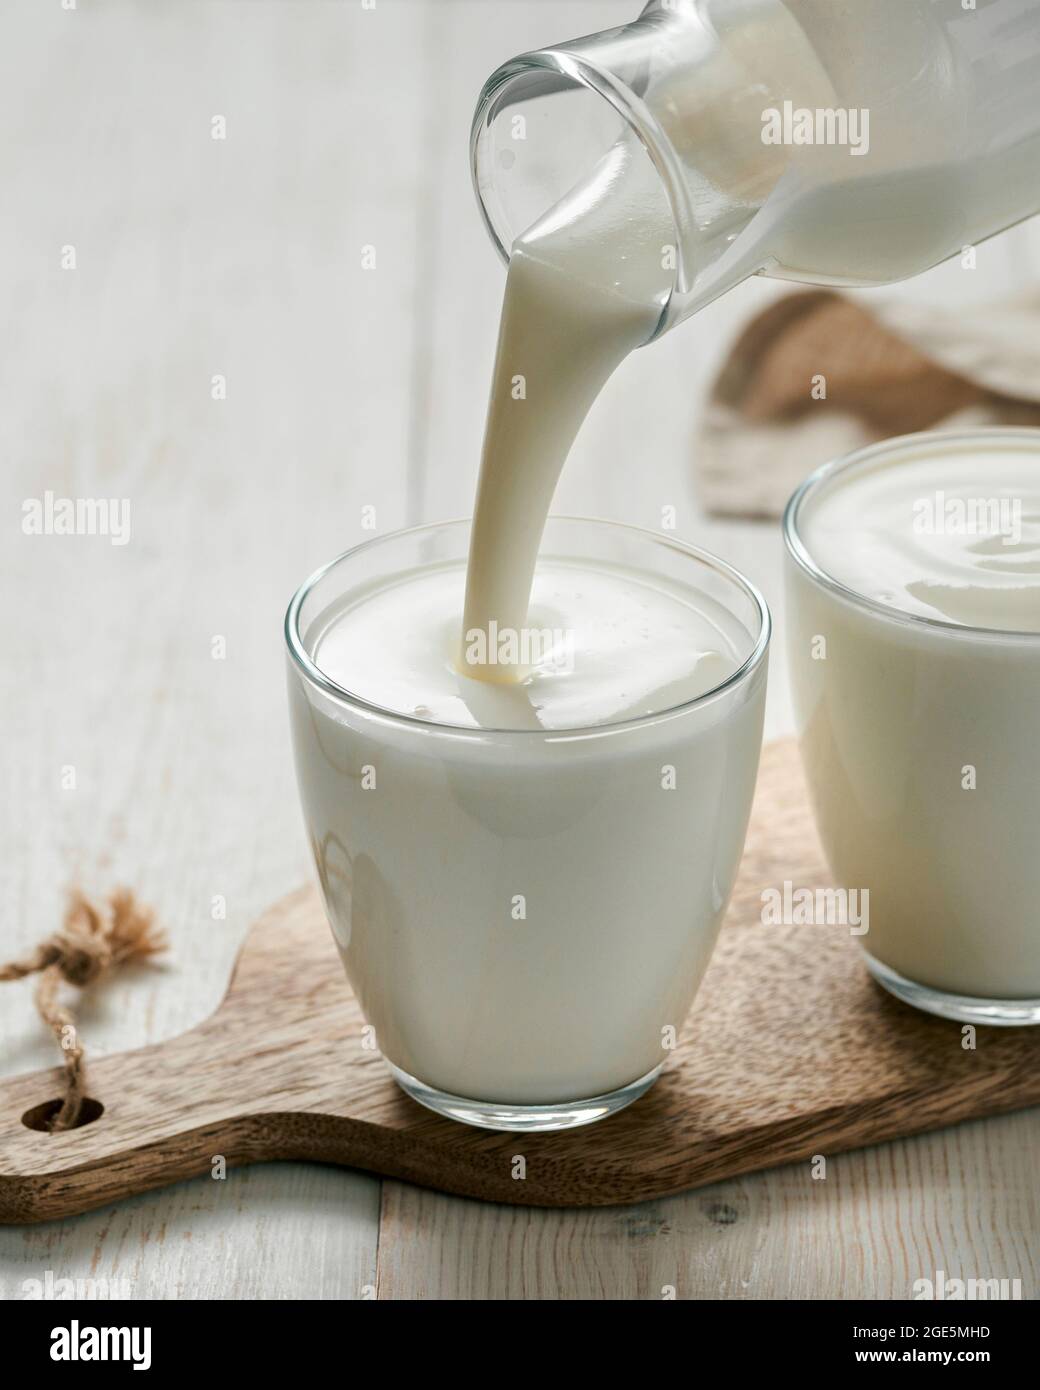 Pouring kefir, buttermilk or yogurt with probiotics. Yogurt flowing from glass bottle on white wooden background. Probiotic cold fermented dairy milk drink. Vertical Stock Photo